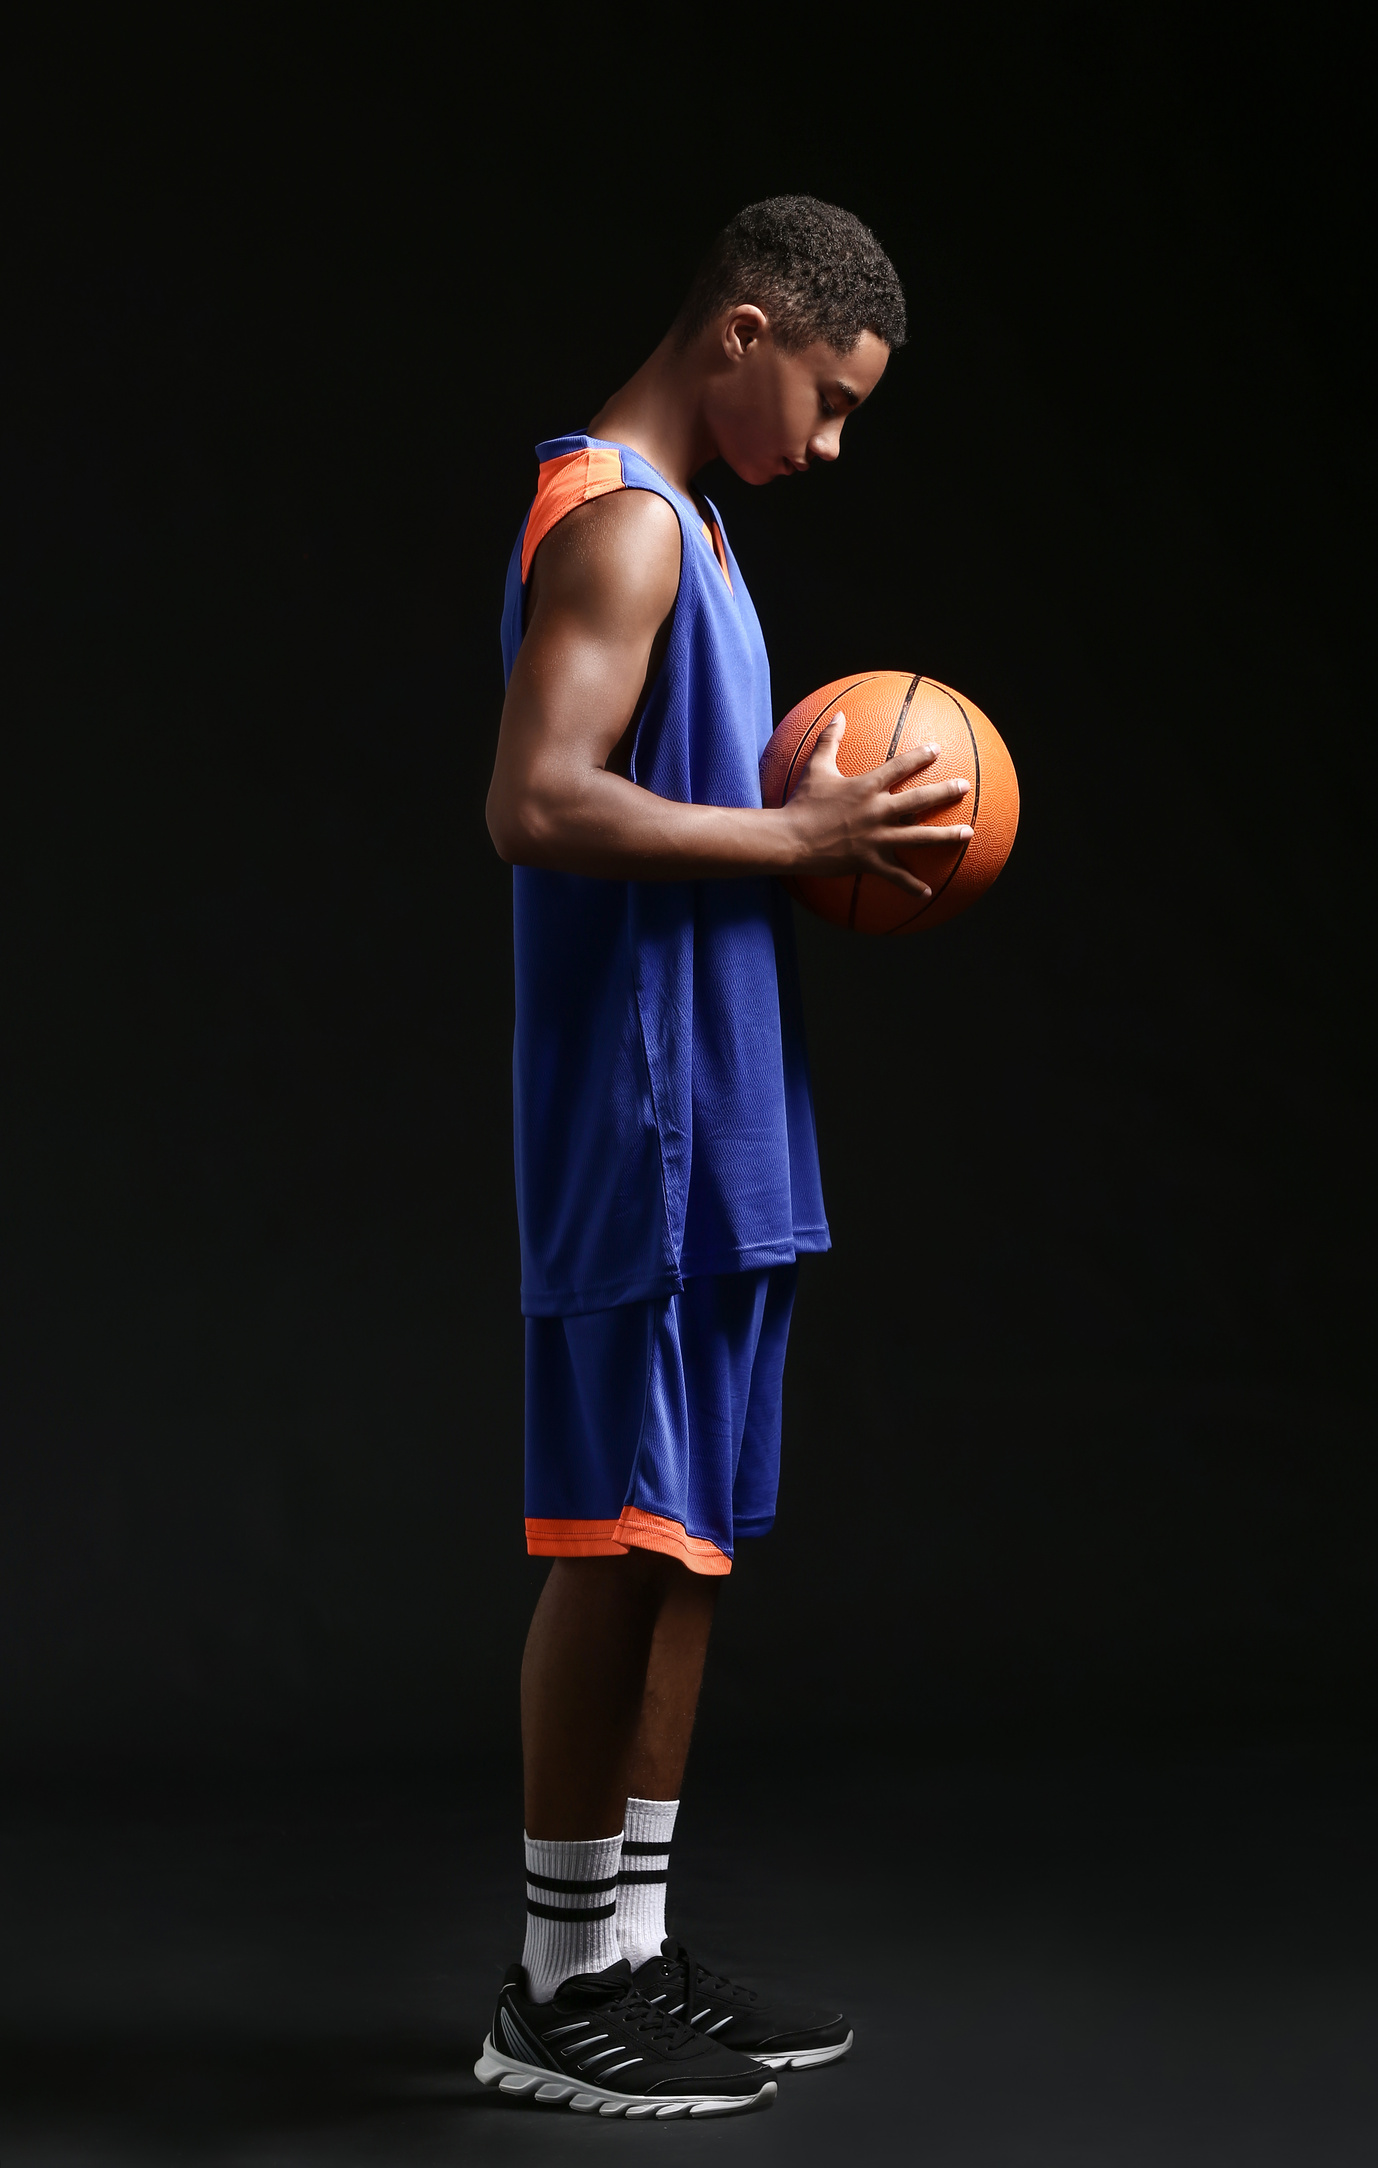 Young Basketball Player on Dark Background